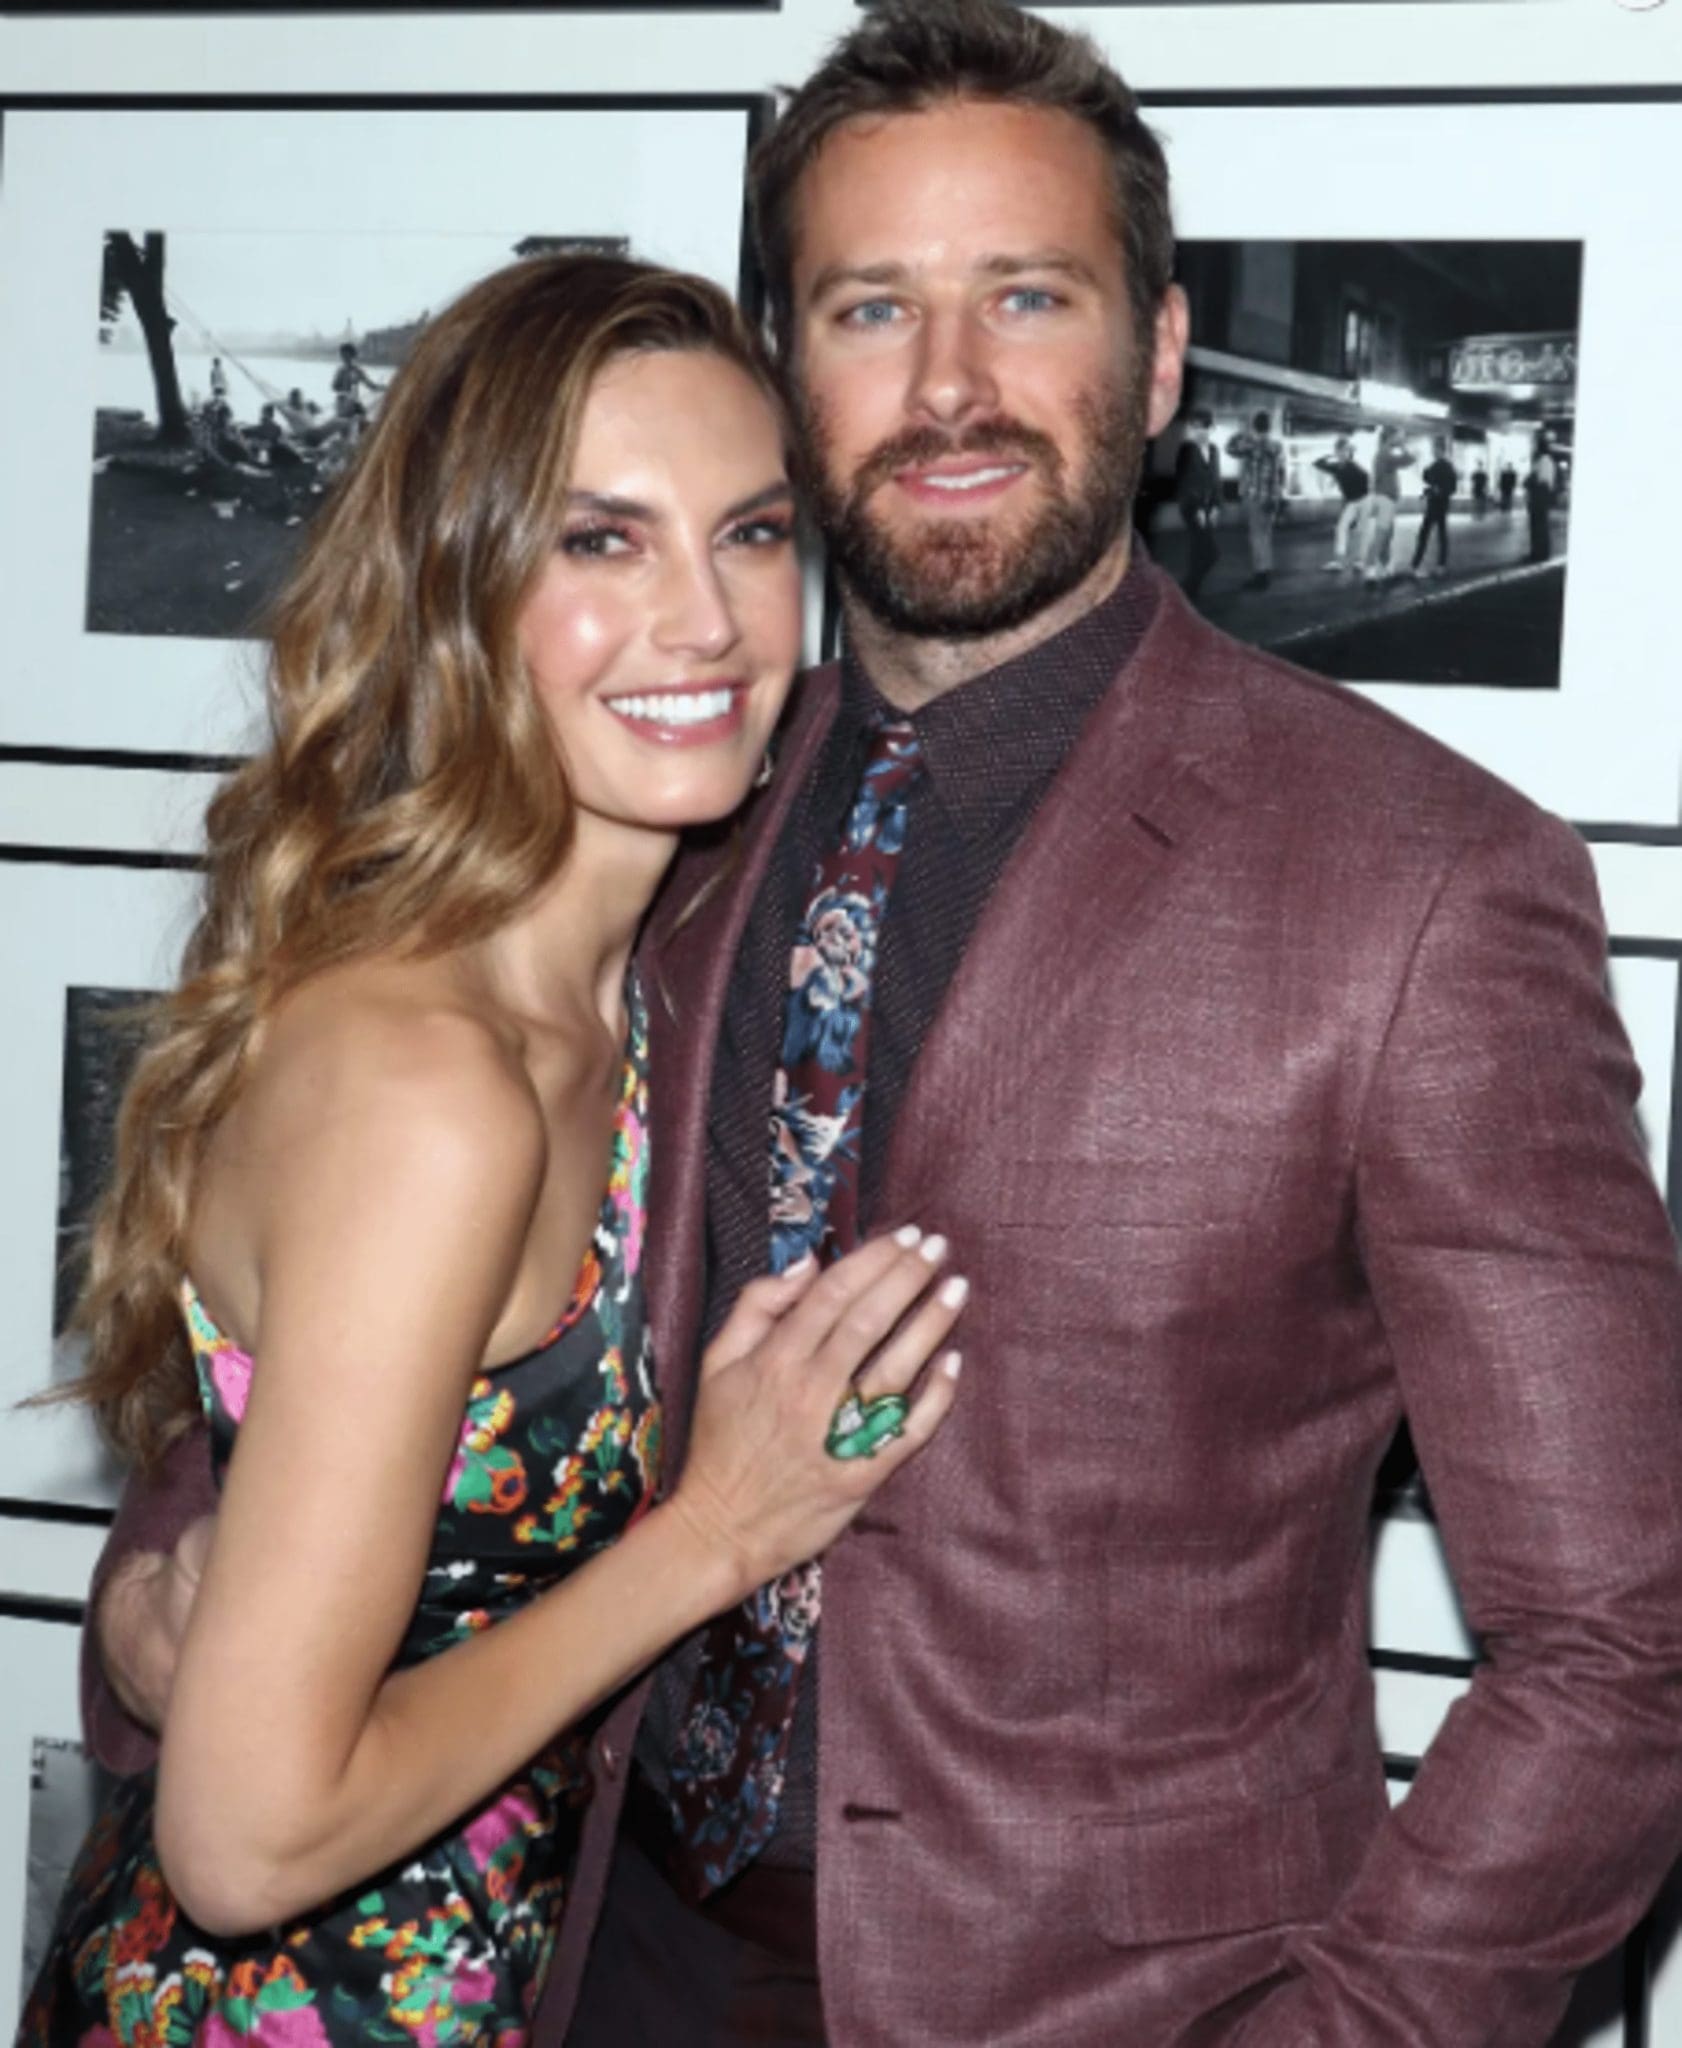 Elizabeth Chambers, The Estranged Wife Of Scandalized Star Armie Hammer, Appears To Have Gone On With Her Life